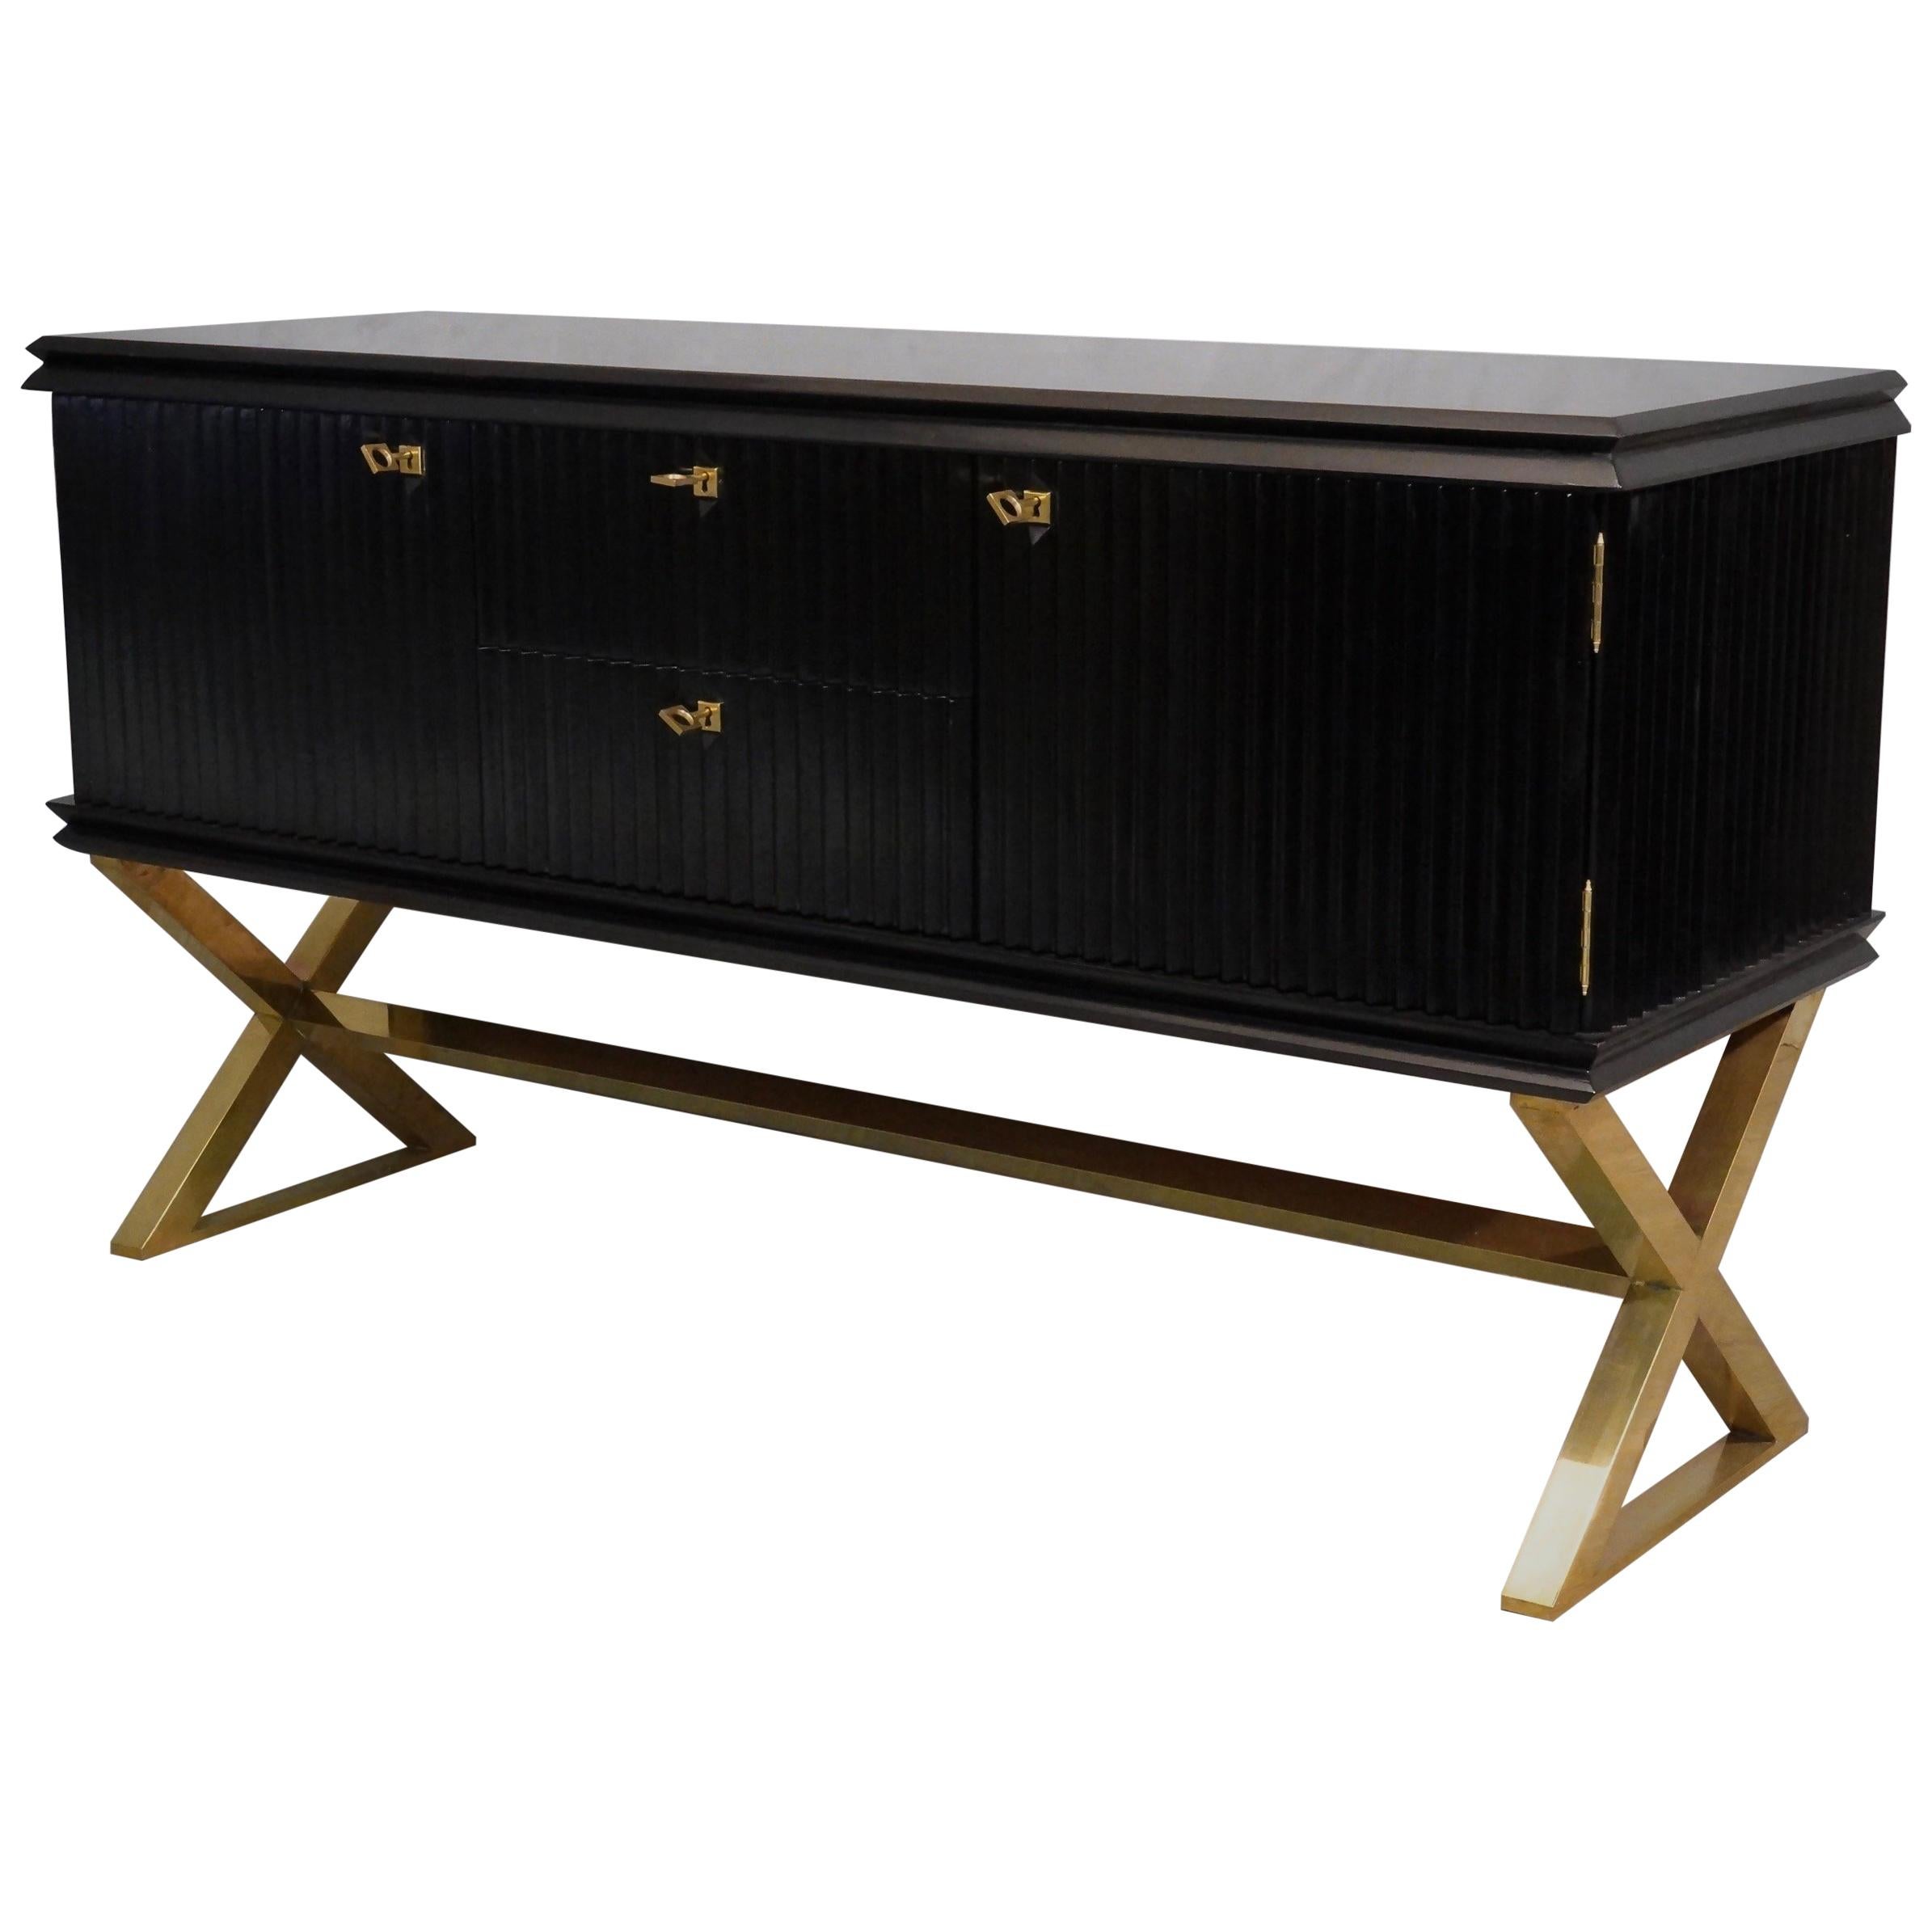 Midcentury Black Shellac and Brass Italian Sideboard, 1950